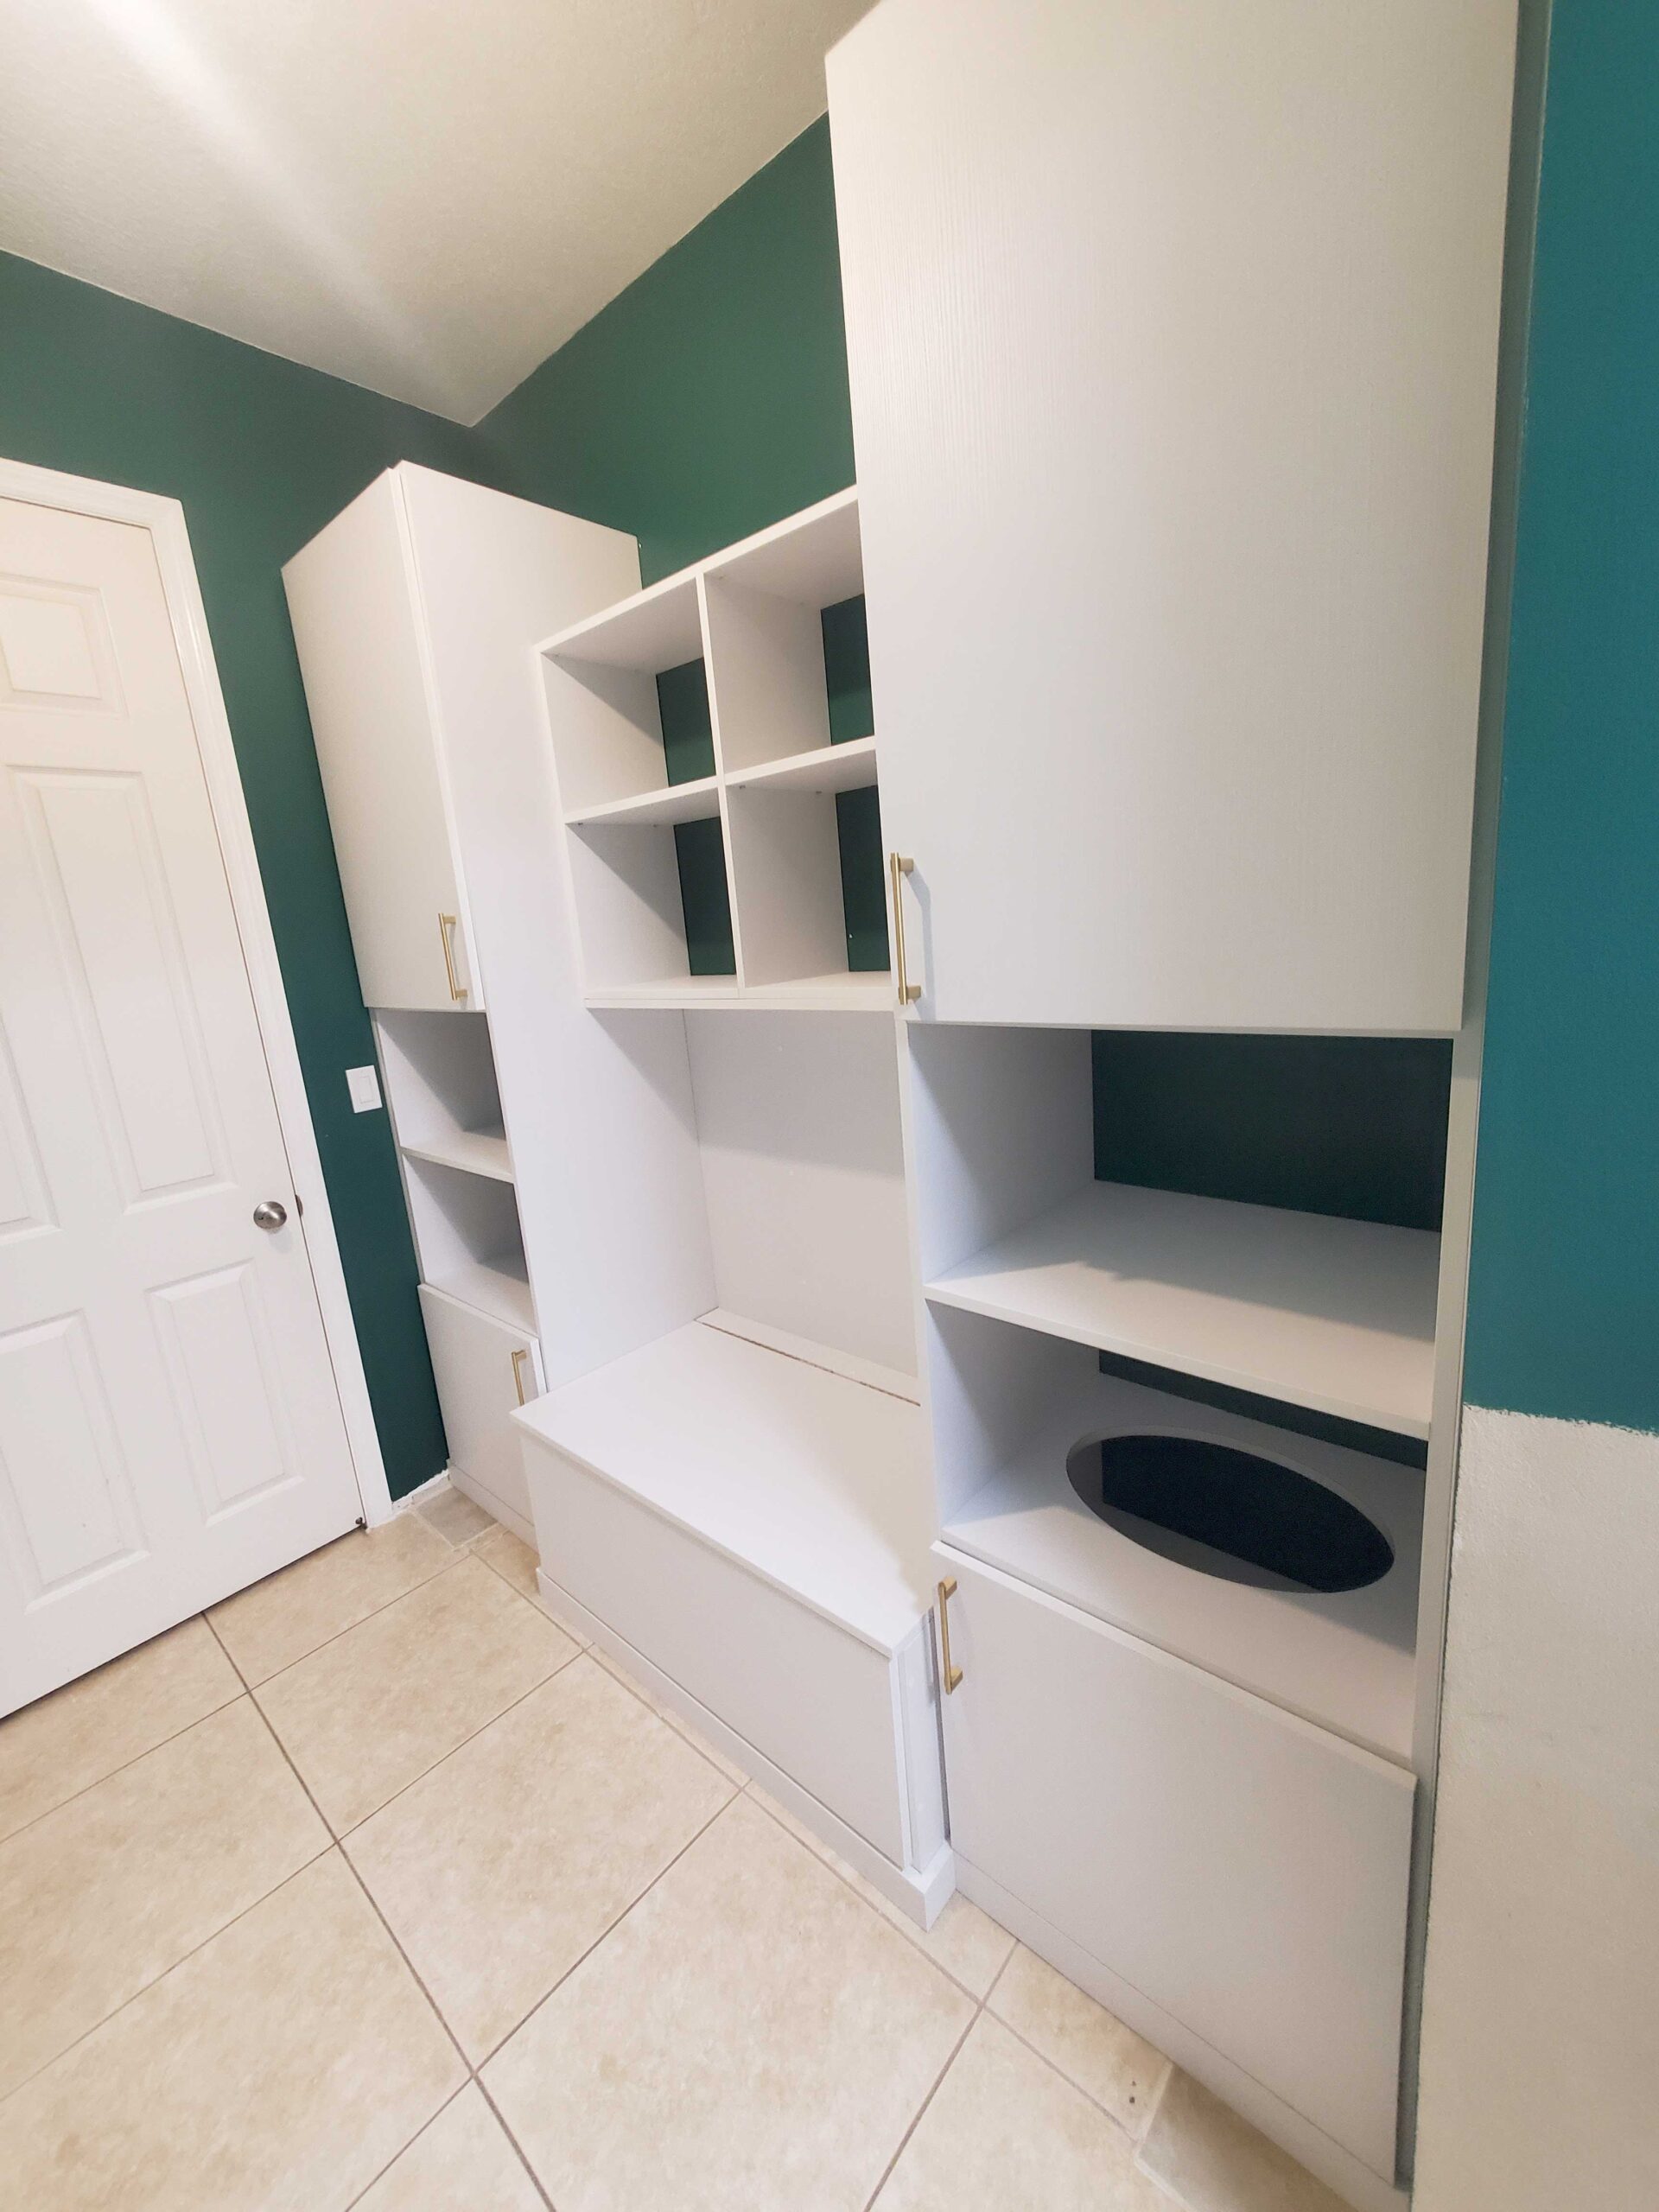 Pantry and Laundry Units